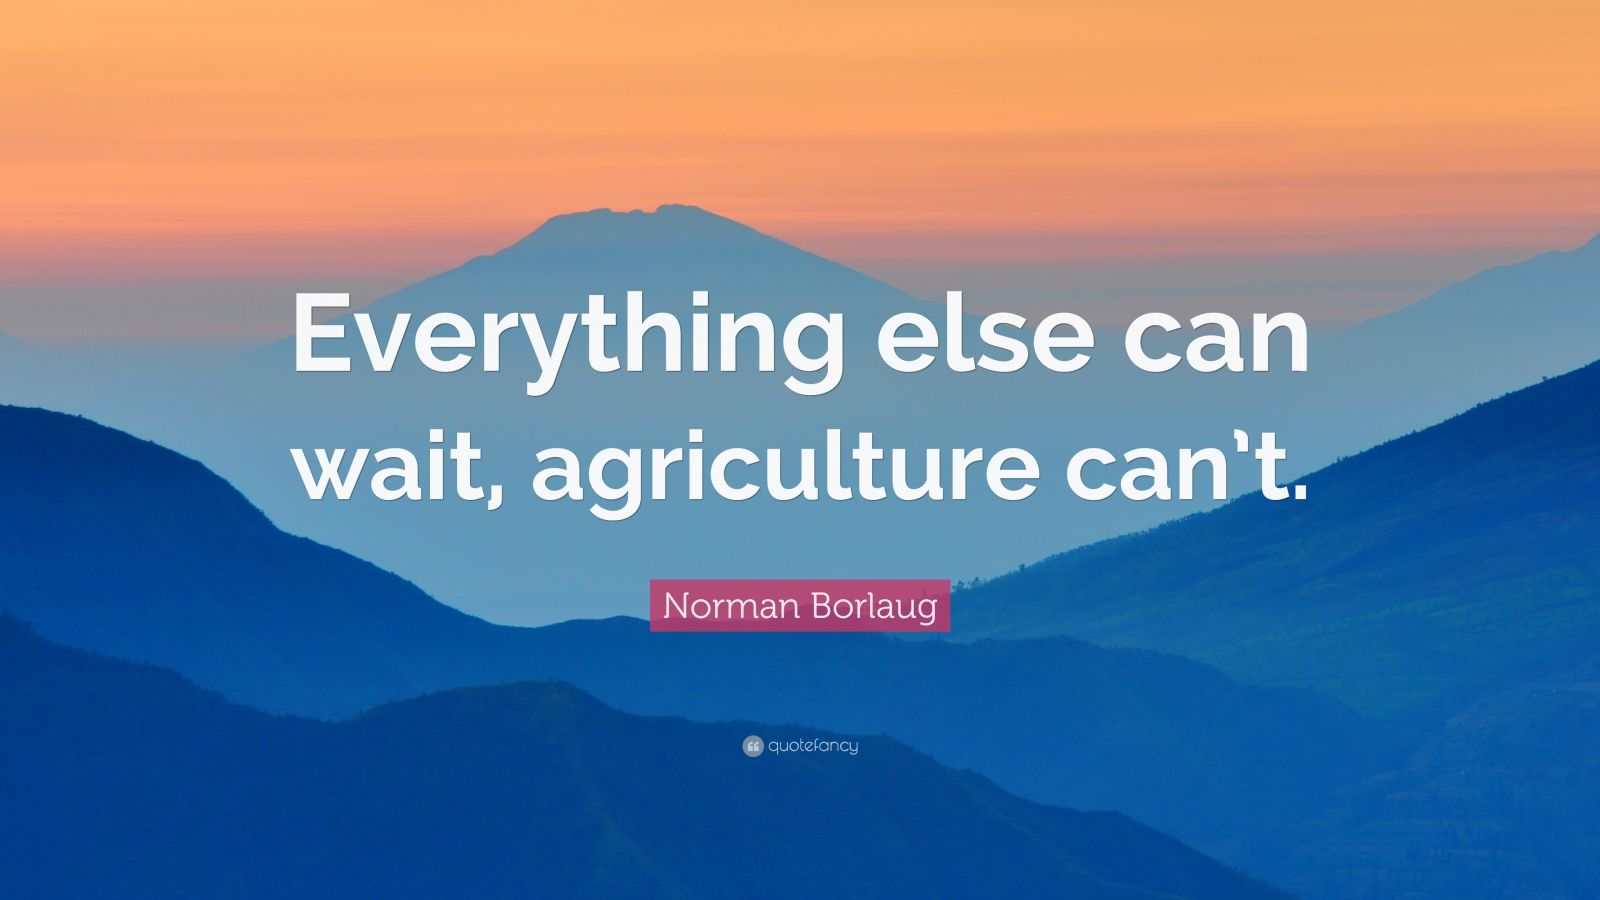 Top 15 Norman Borlaug Quotes | 2021 Edition | Free Images - QuoteFancy